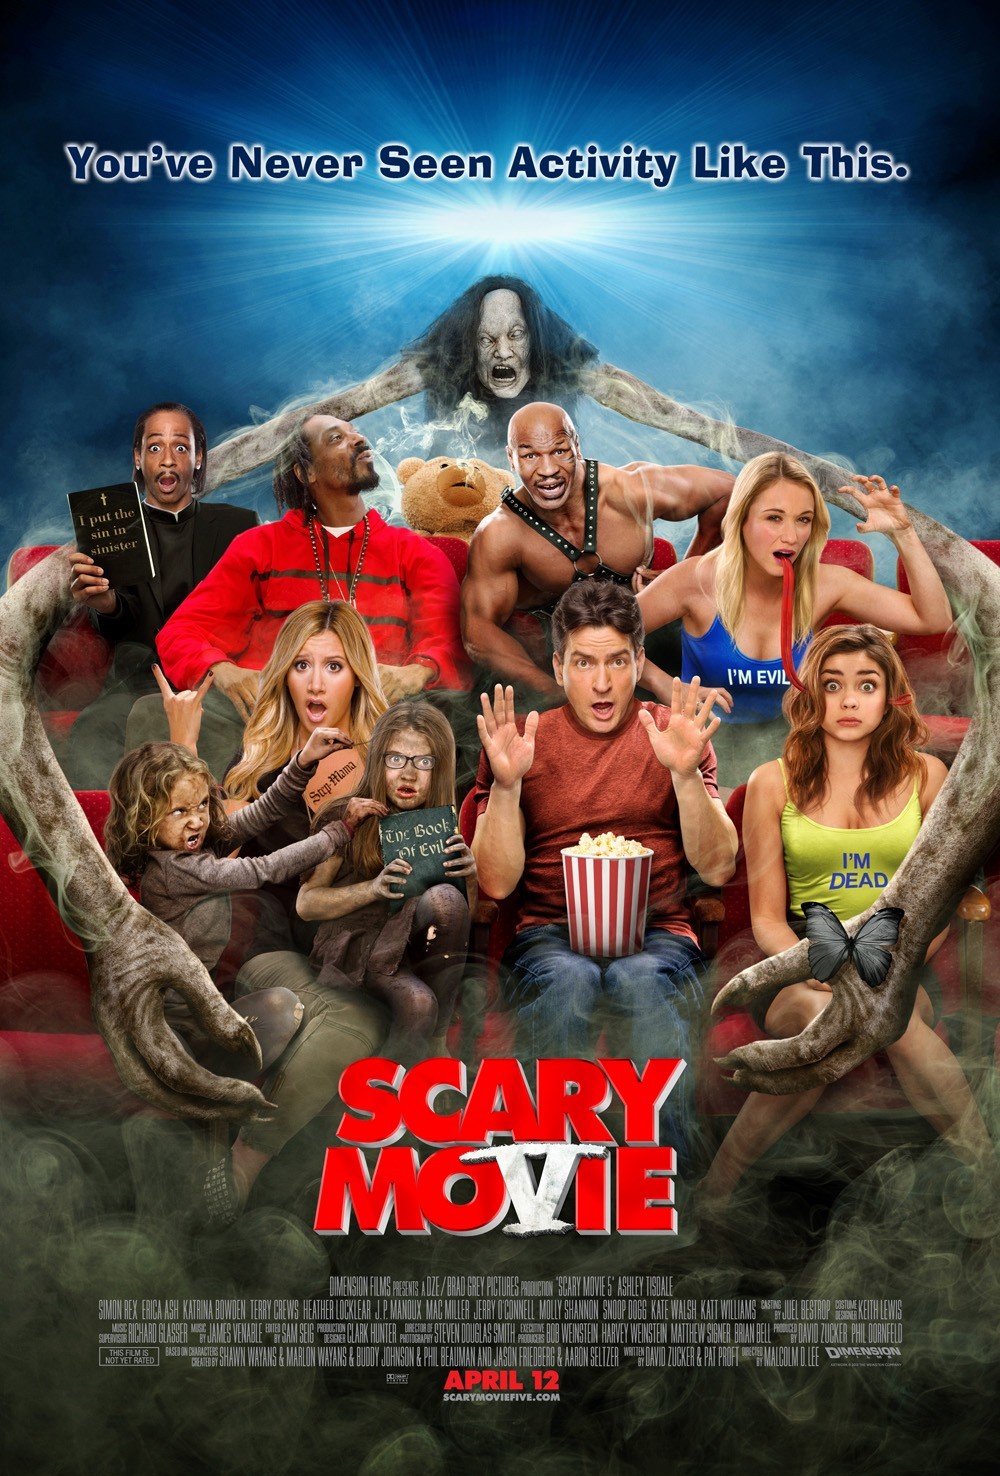 Poster of Dimension Films' Scary Movie 5 (2013)